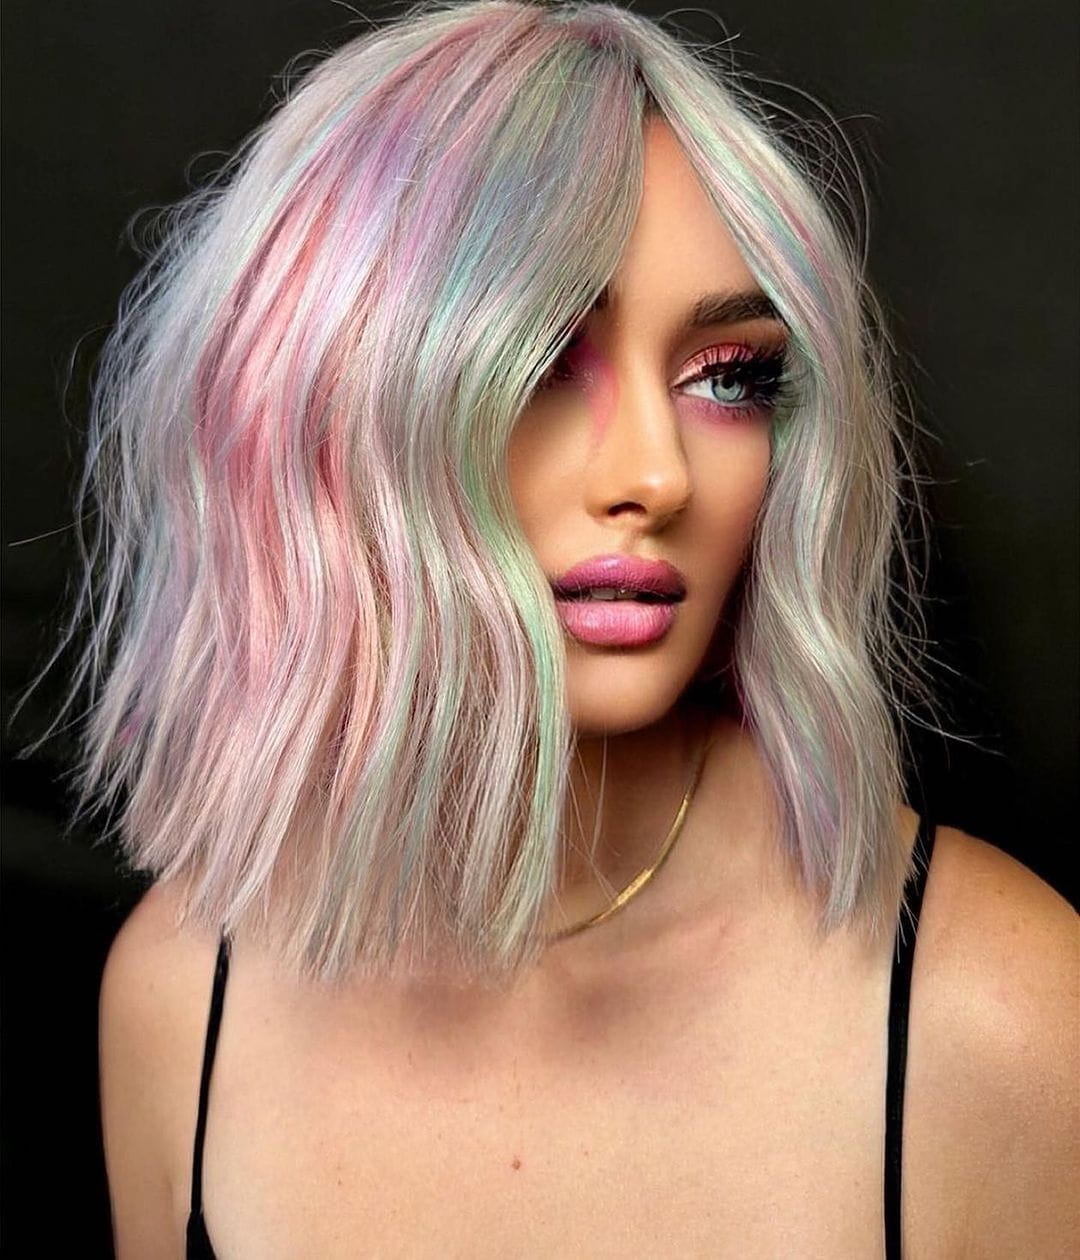 100+ Best Colorful Hair Ideas images 52